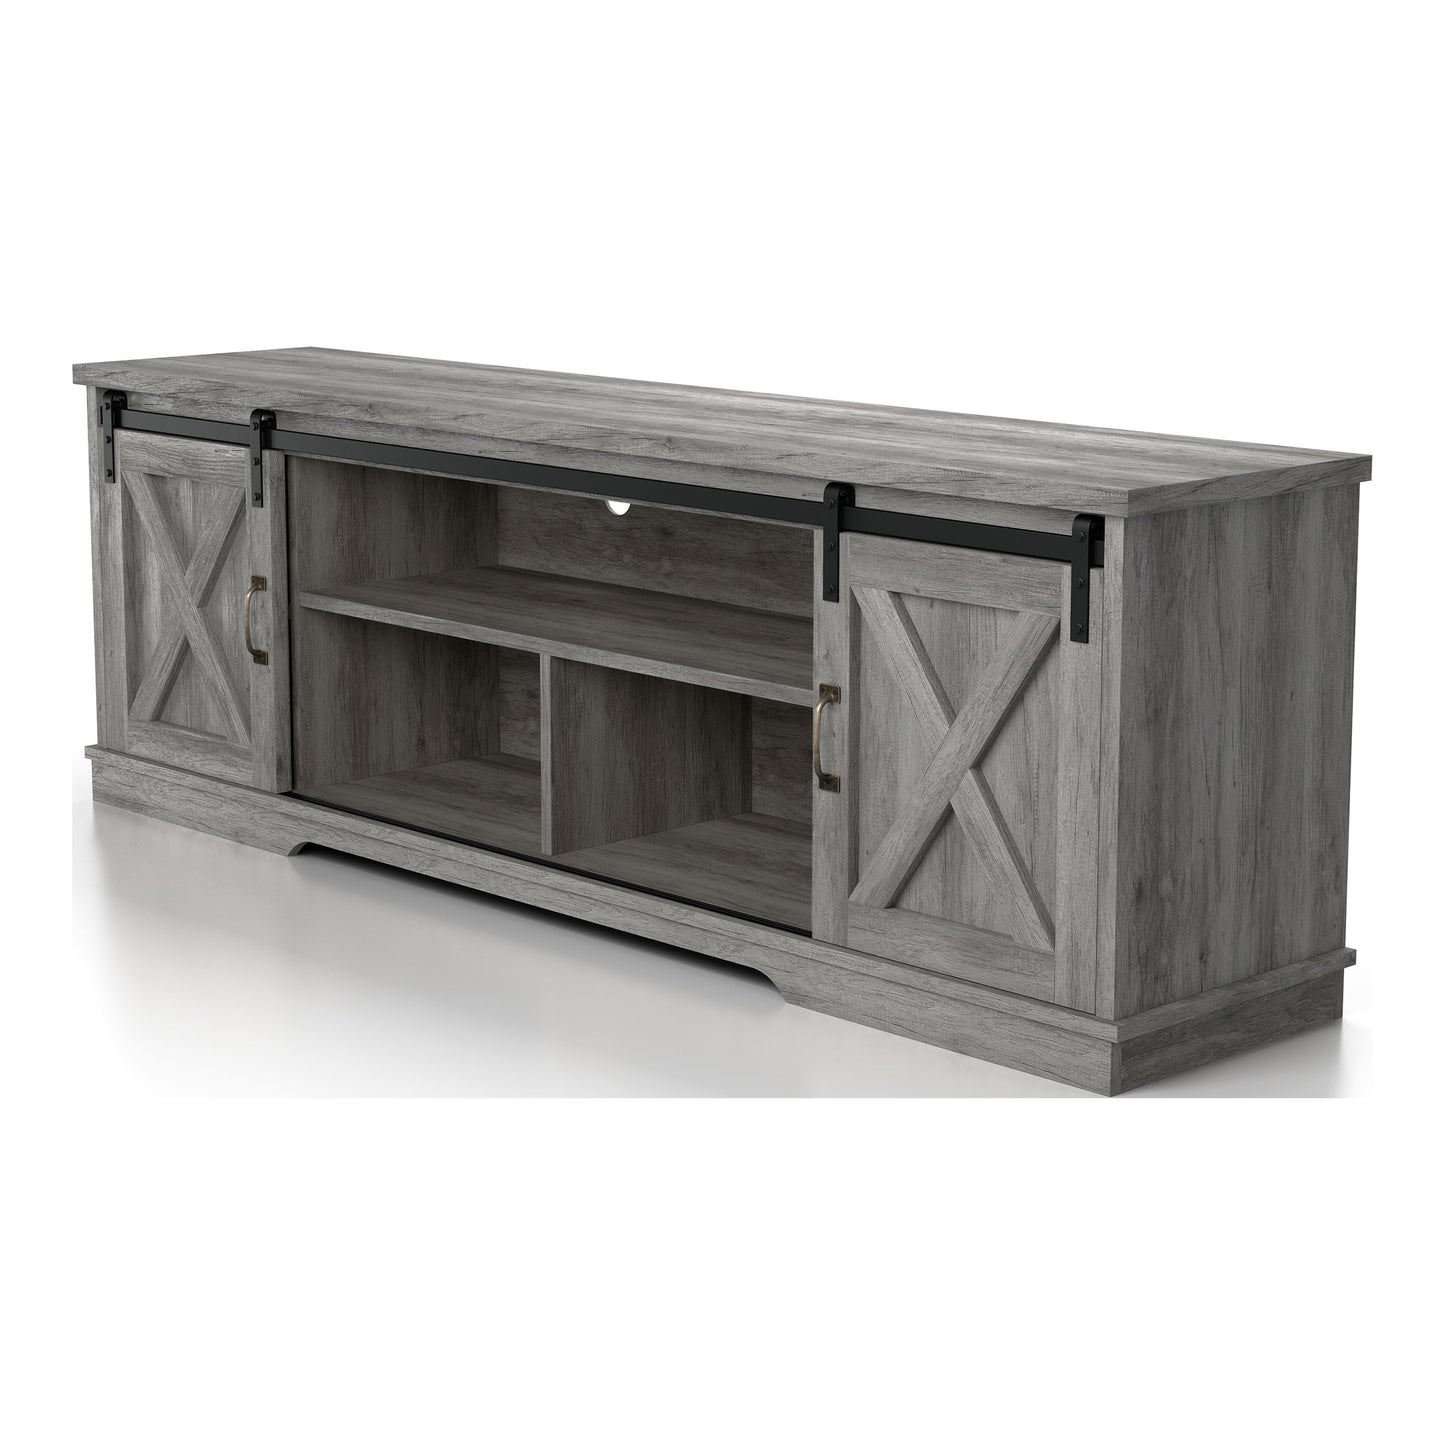 Left angled rustic vintage gray oak three-shelf two-cabinet TV stand on a white background